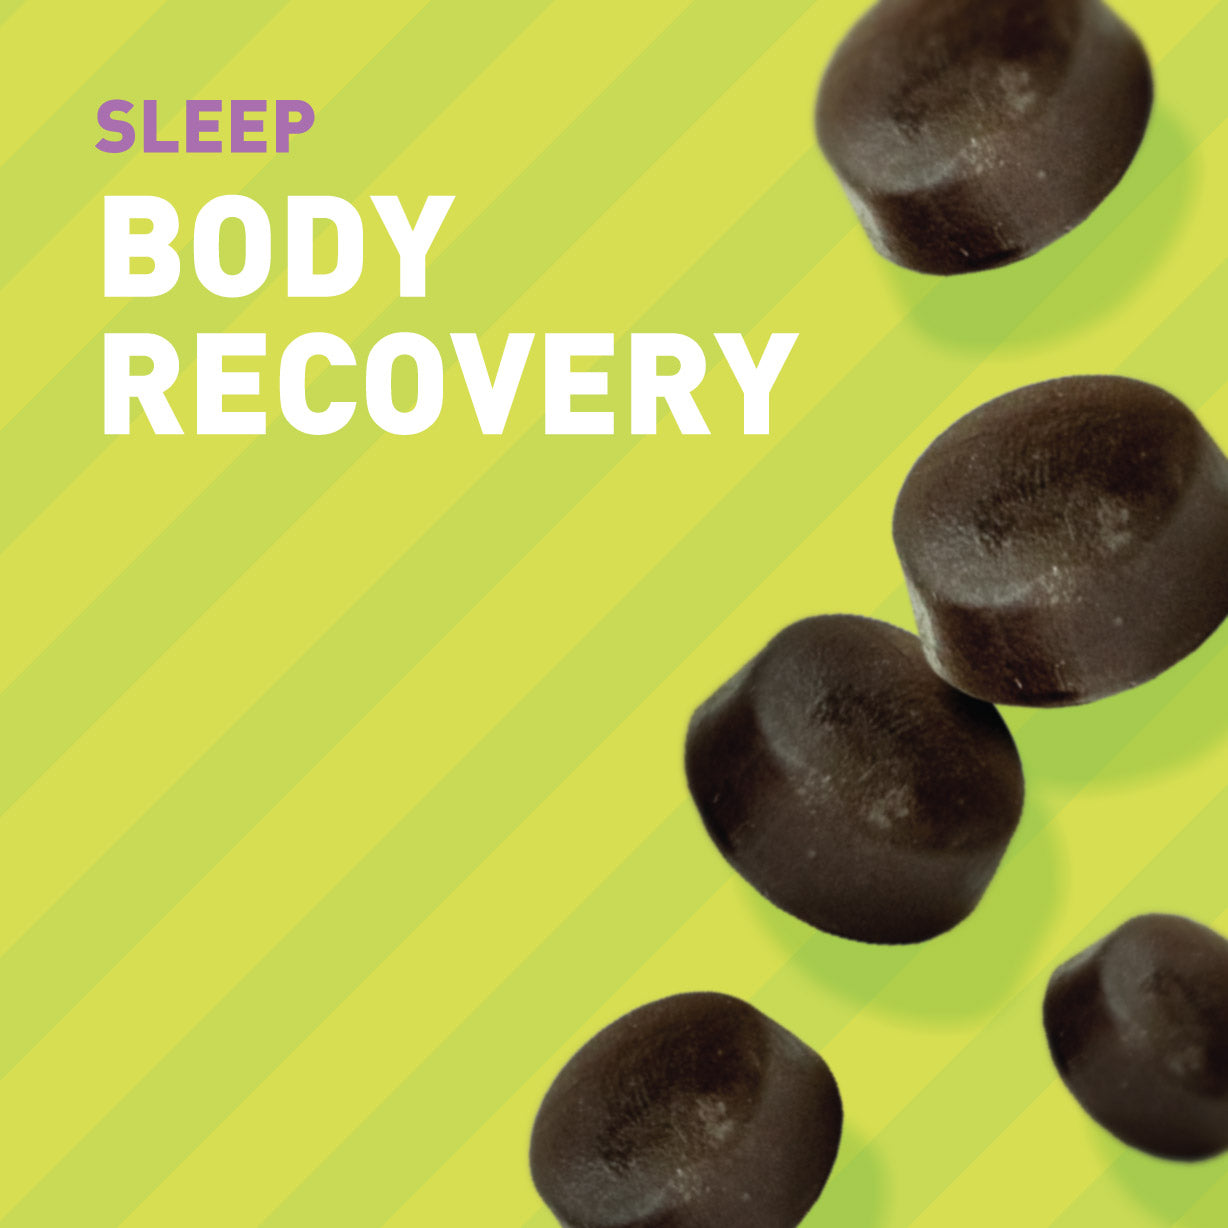 5 HTP gummies can help the body and mind recover after a hard weekend. Delicious mixed berry flavour supplements for sleep